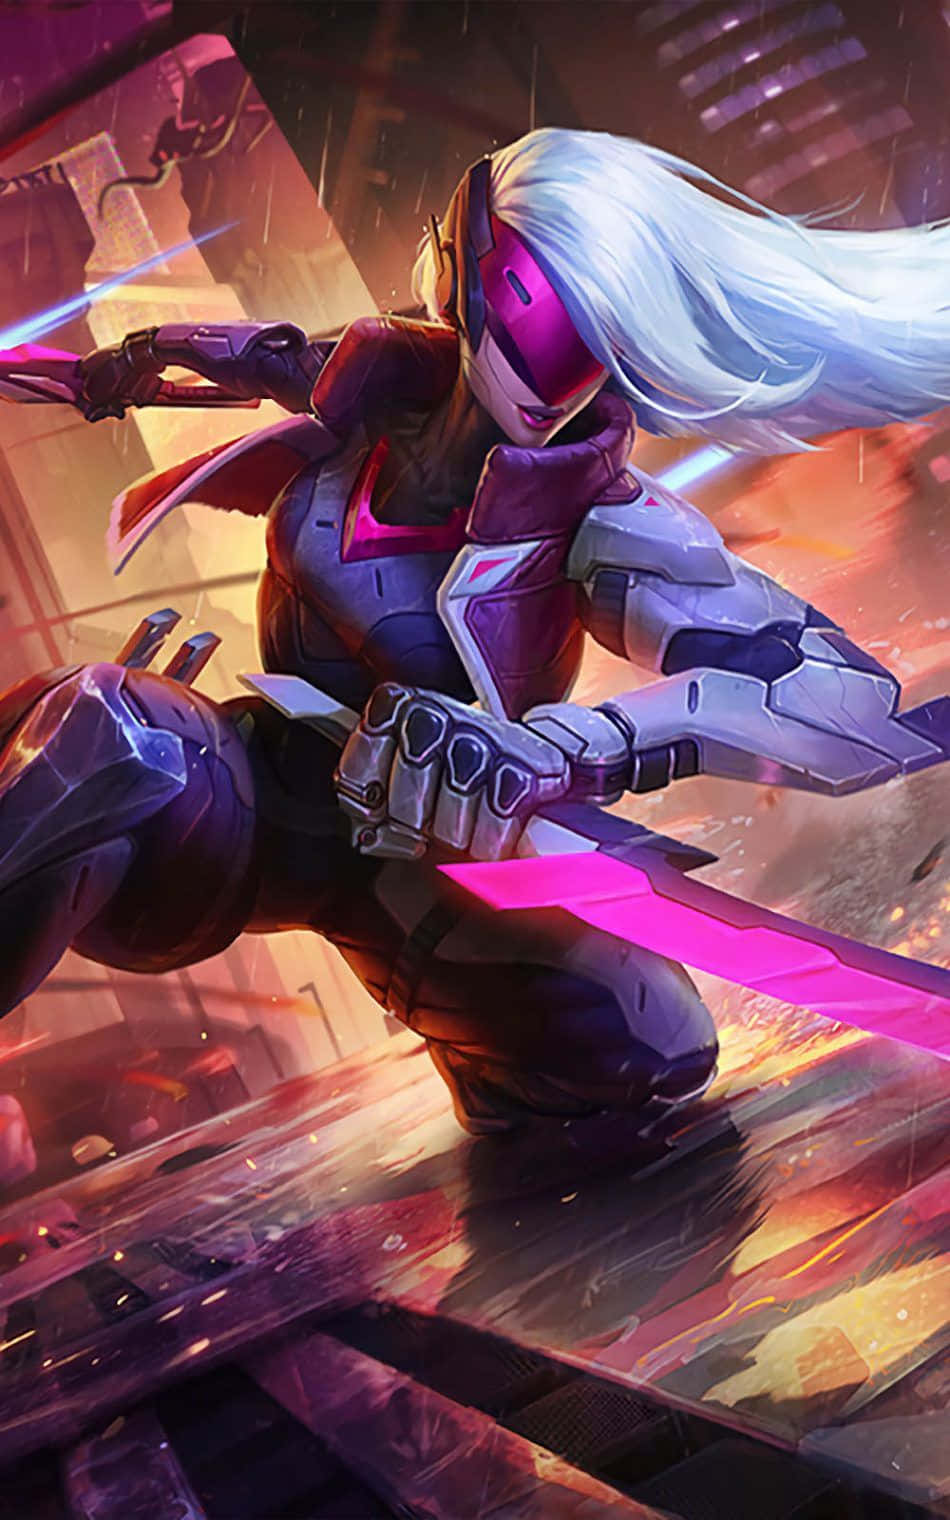 Get Ready For Intense Action With League Of Legends On Your Phone Wallpaper